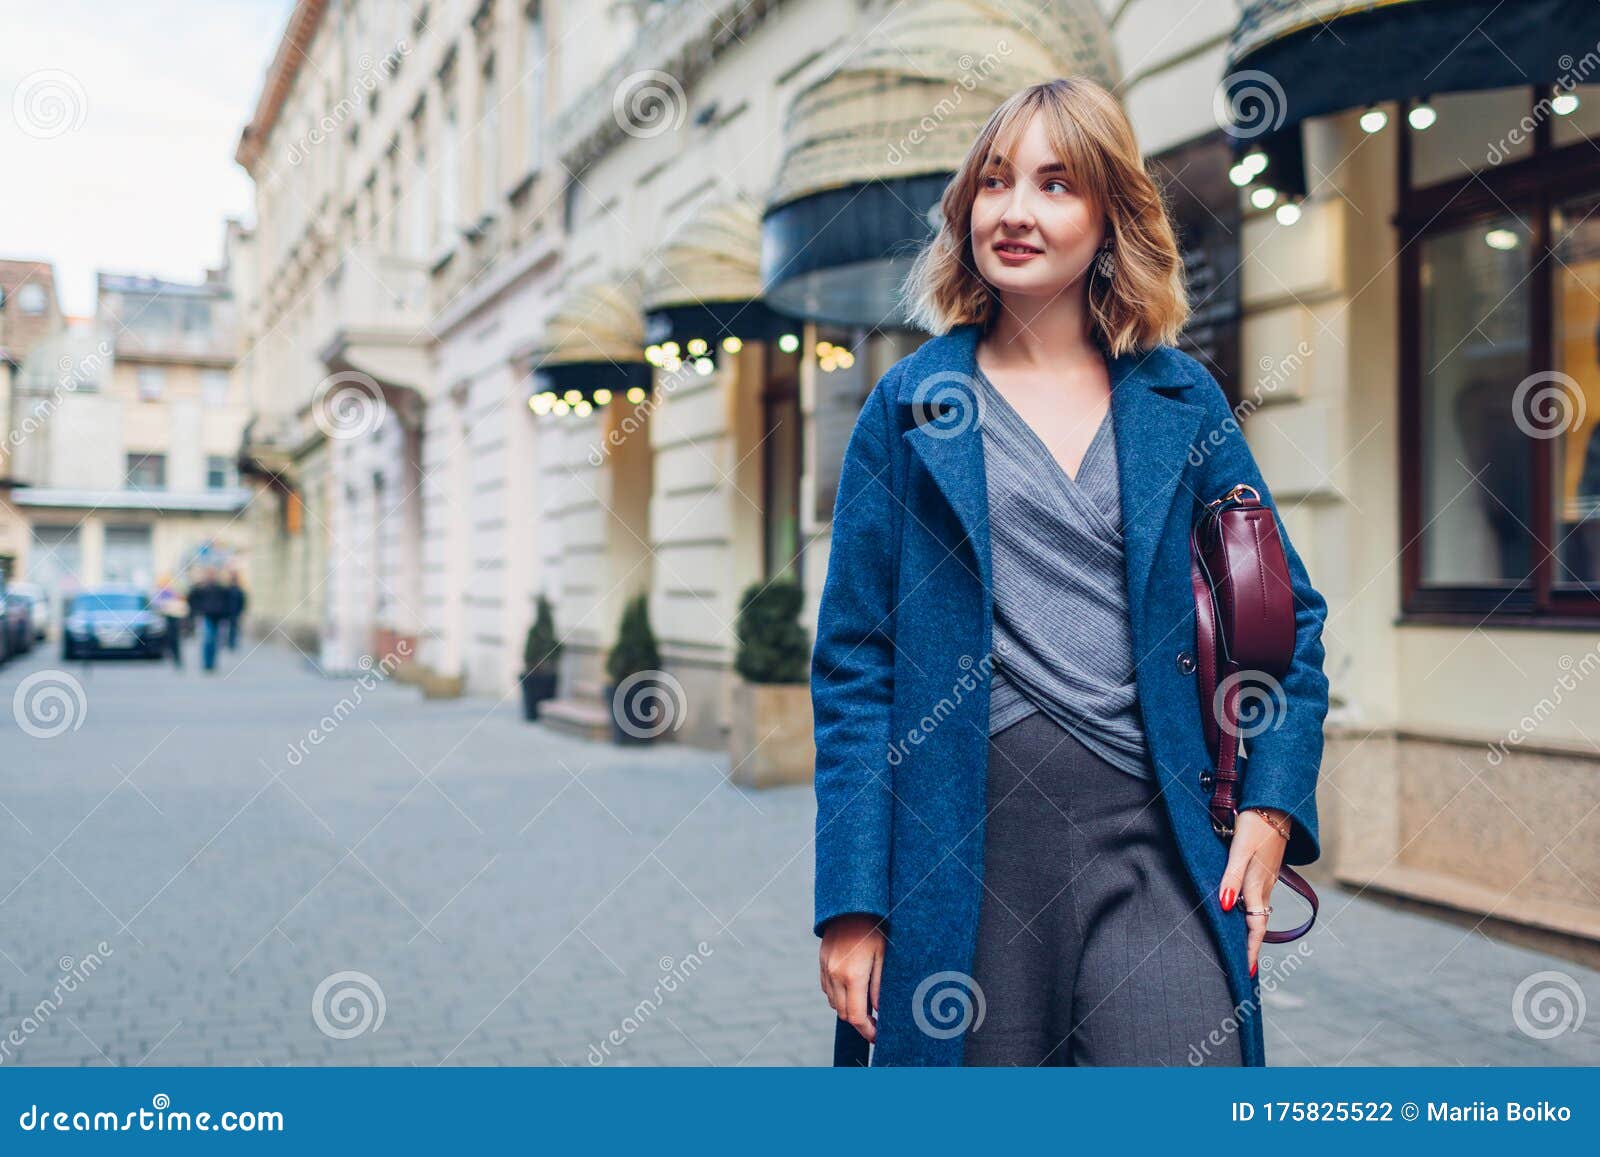 Stylish Young Woman Wearing Trendy Outfit Blue Coat Walking with Purse Spring Fashion Female Accessories Stock Photo - of earrings, lvov: 175825522